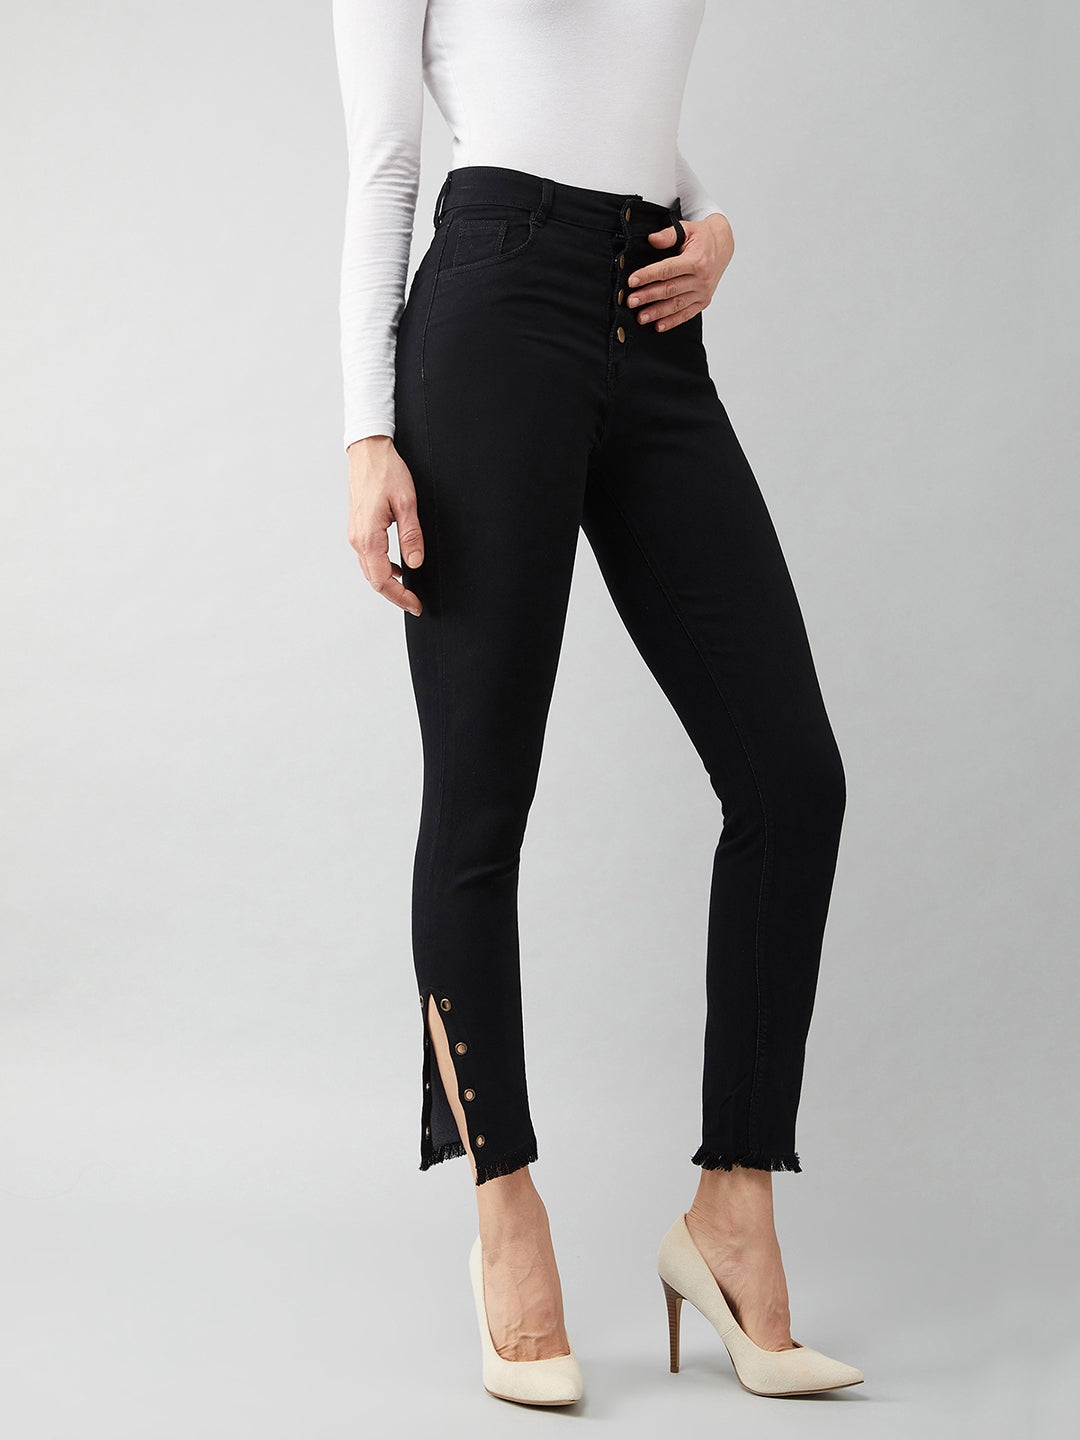 Black Skinny Fit Relaxed High Rise Regular Length Denim Stretchable Jeans